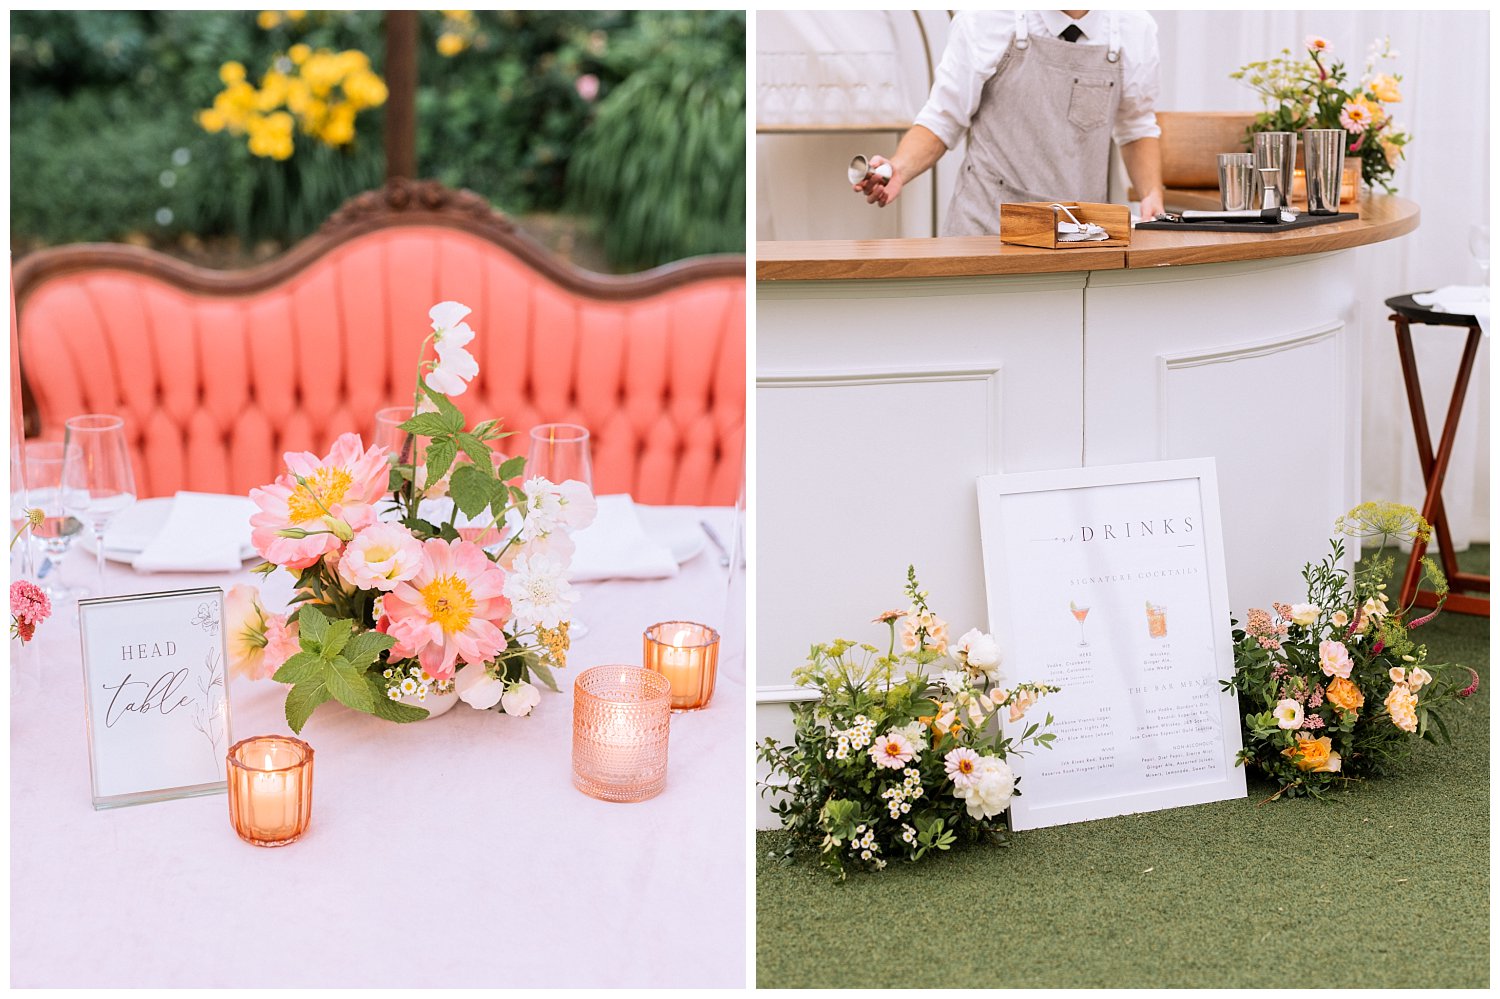 Reception details at a colorful summer wedding in Charlottesville, Virginia